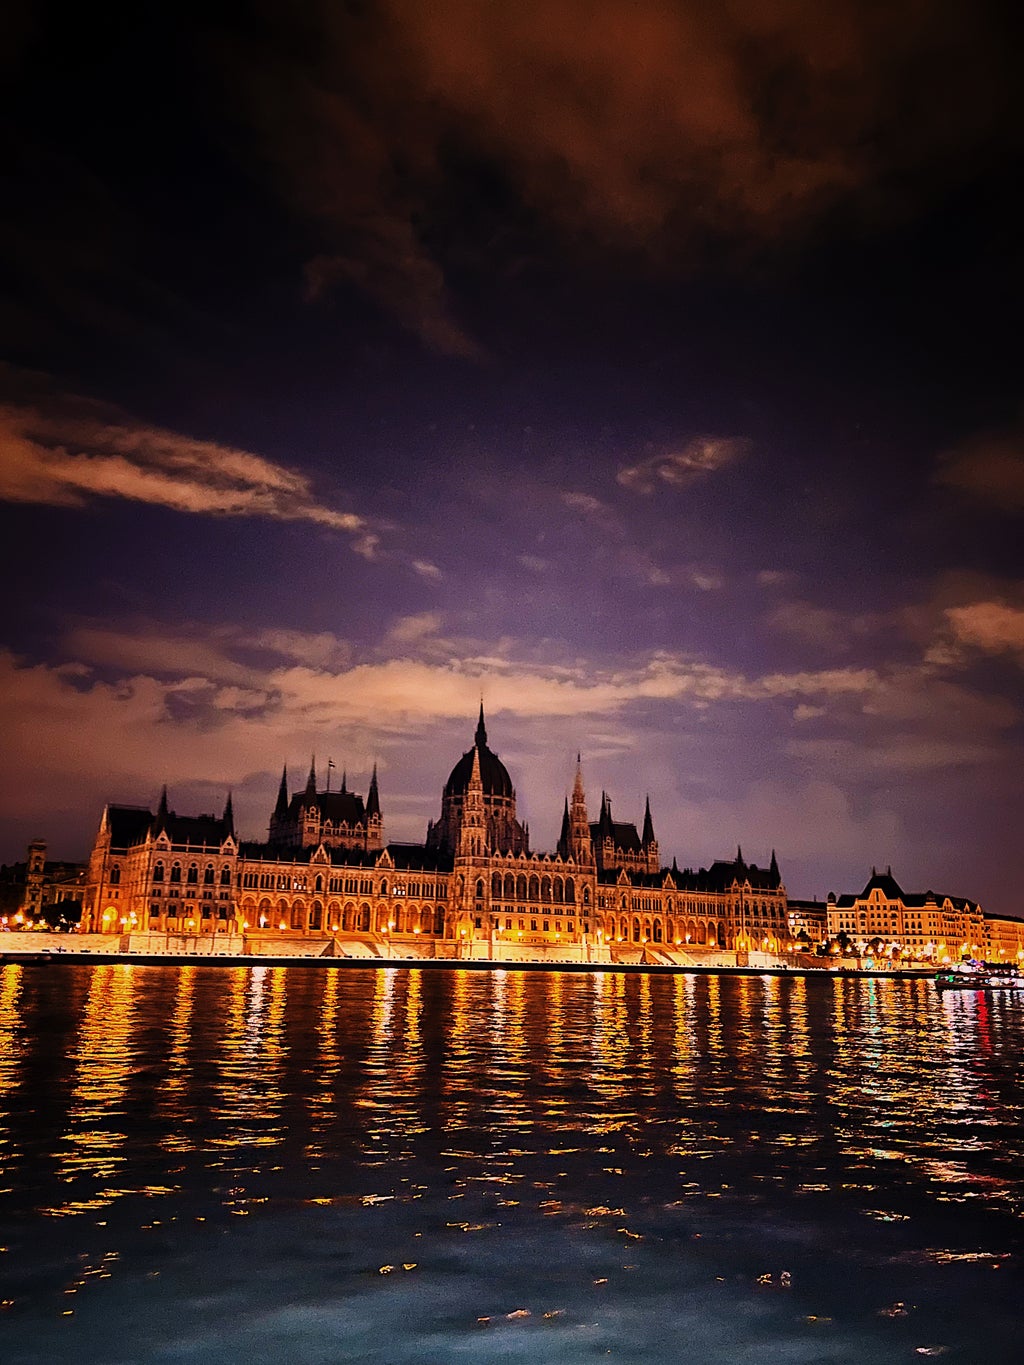 A castle at night in Budapest, Hungary looking over the Danube River.